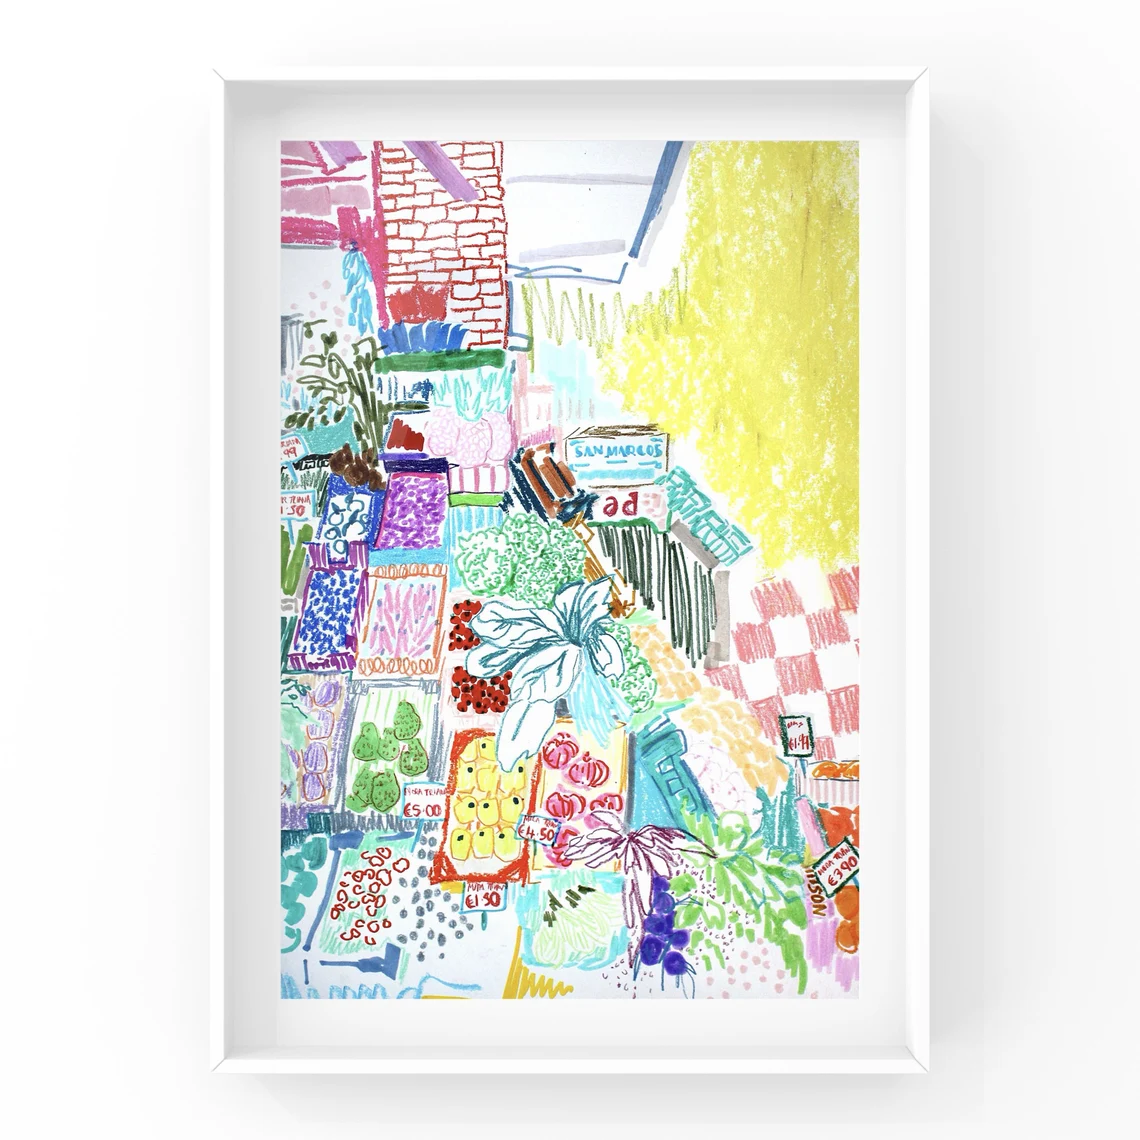 One-of-a-kind fruit market pen illustration | Unique colorful wall art | Spain travel wall art